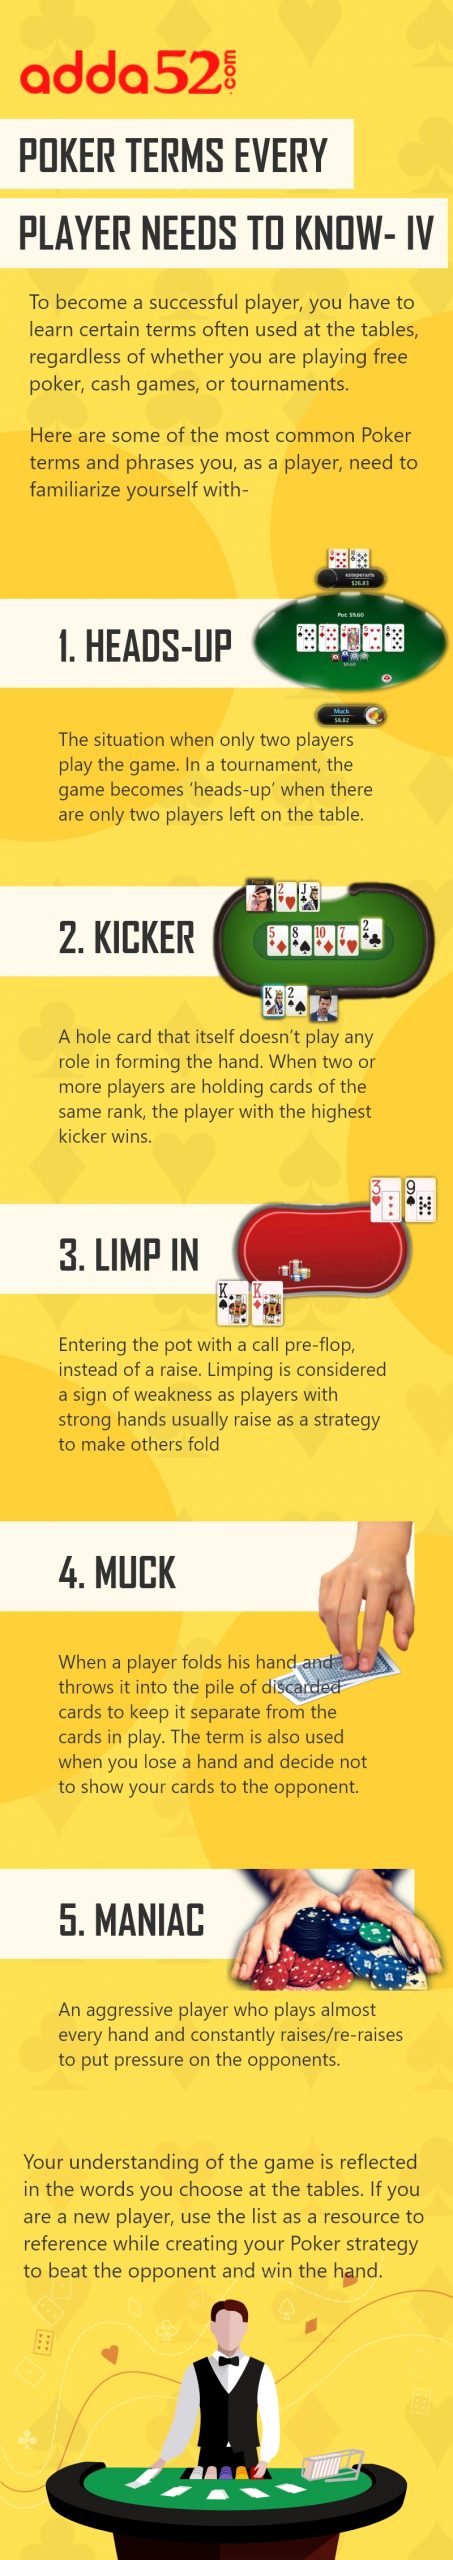 Poker Terms Every Player Needs To Know - IV